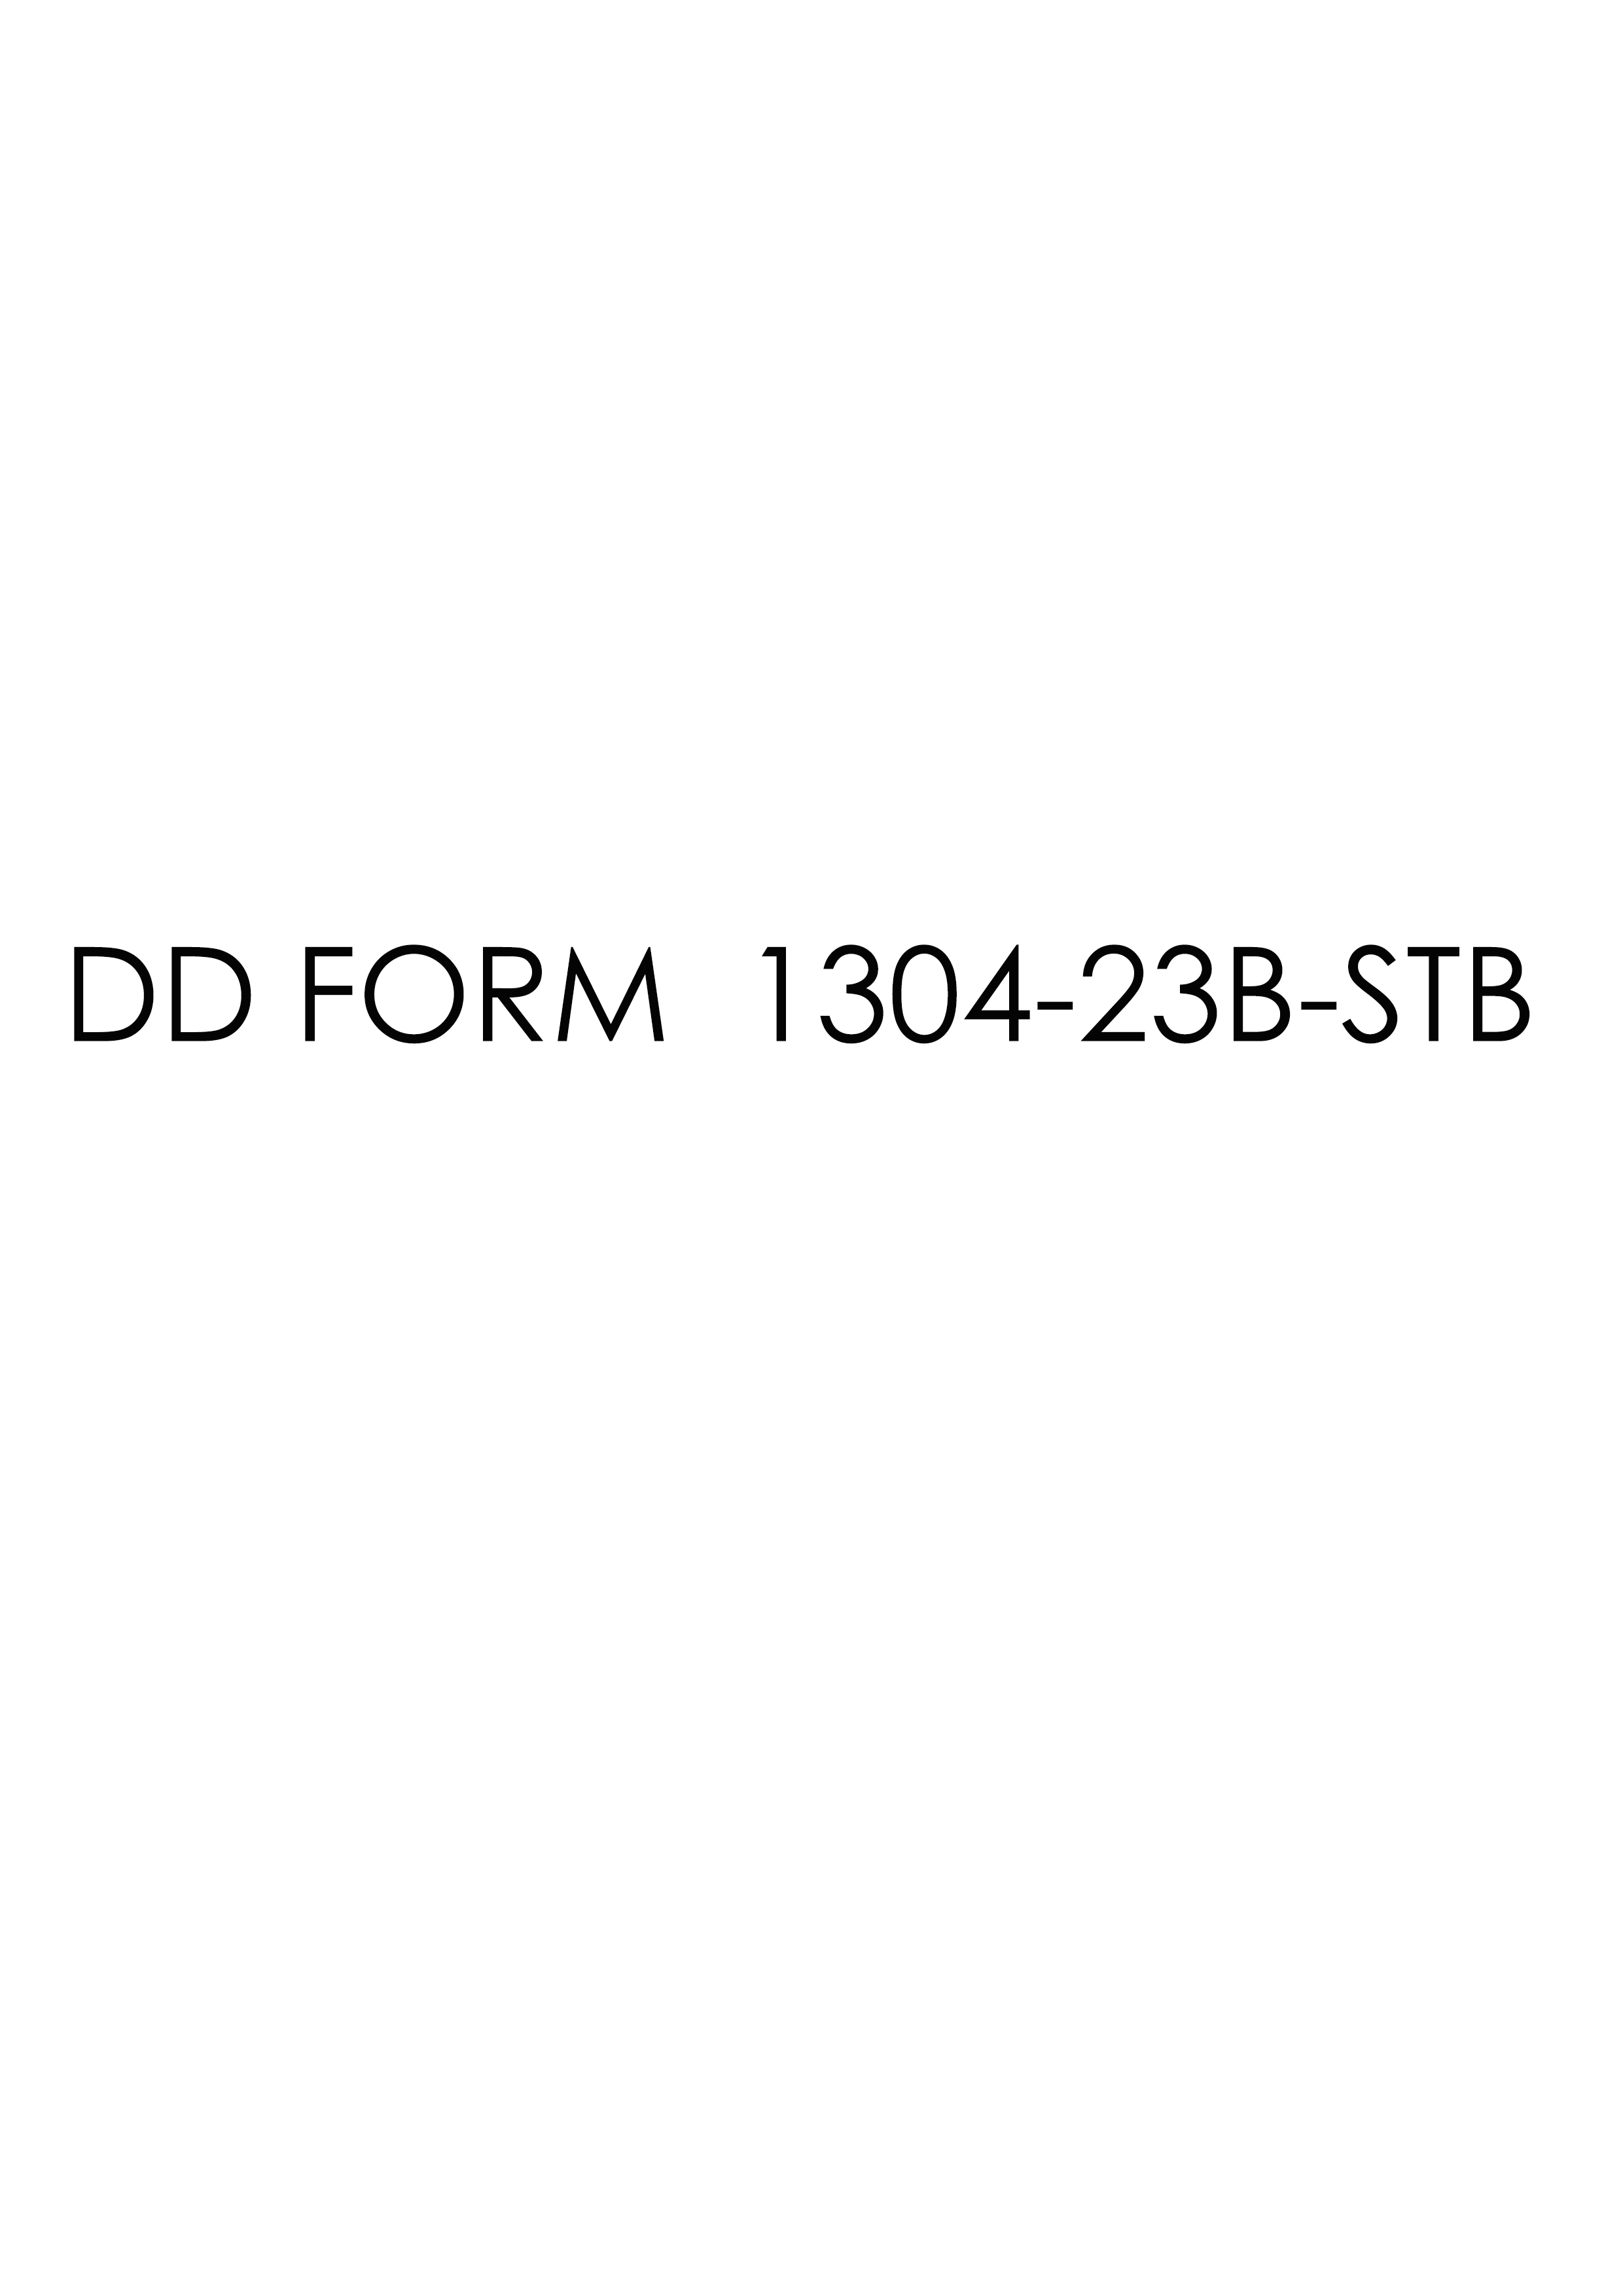 Download Fillable dd Form 1304-23B-STB